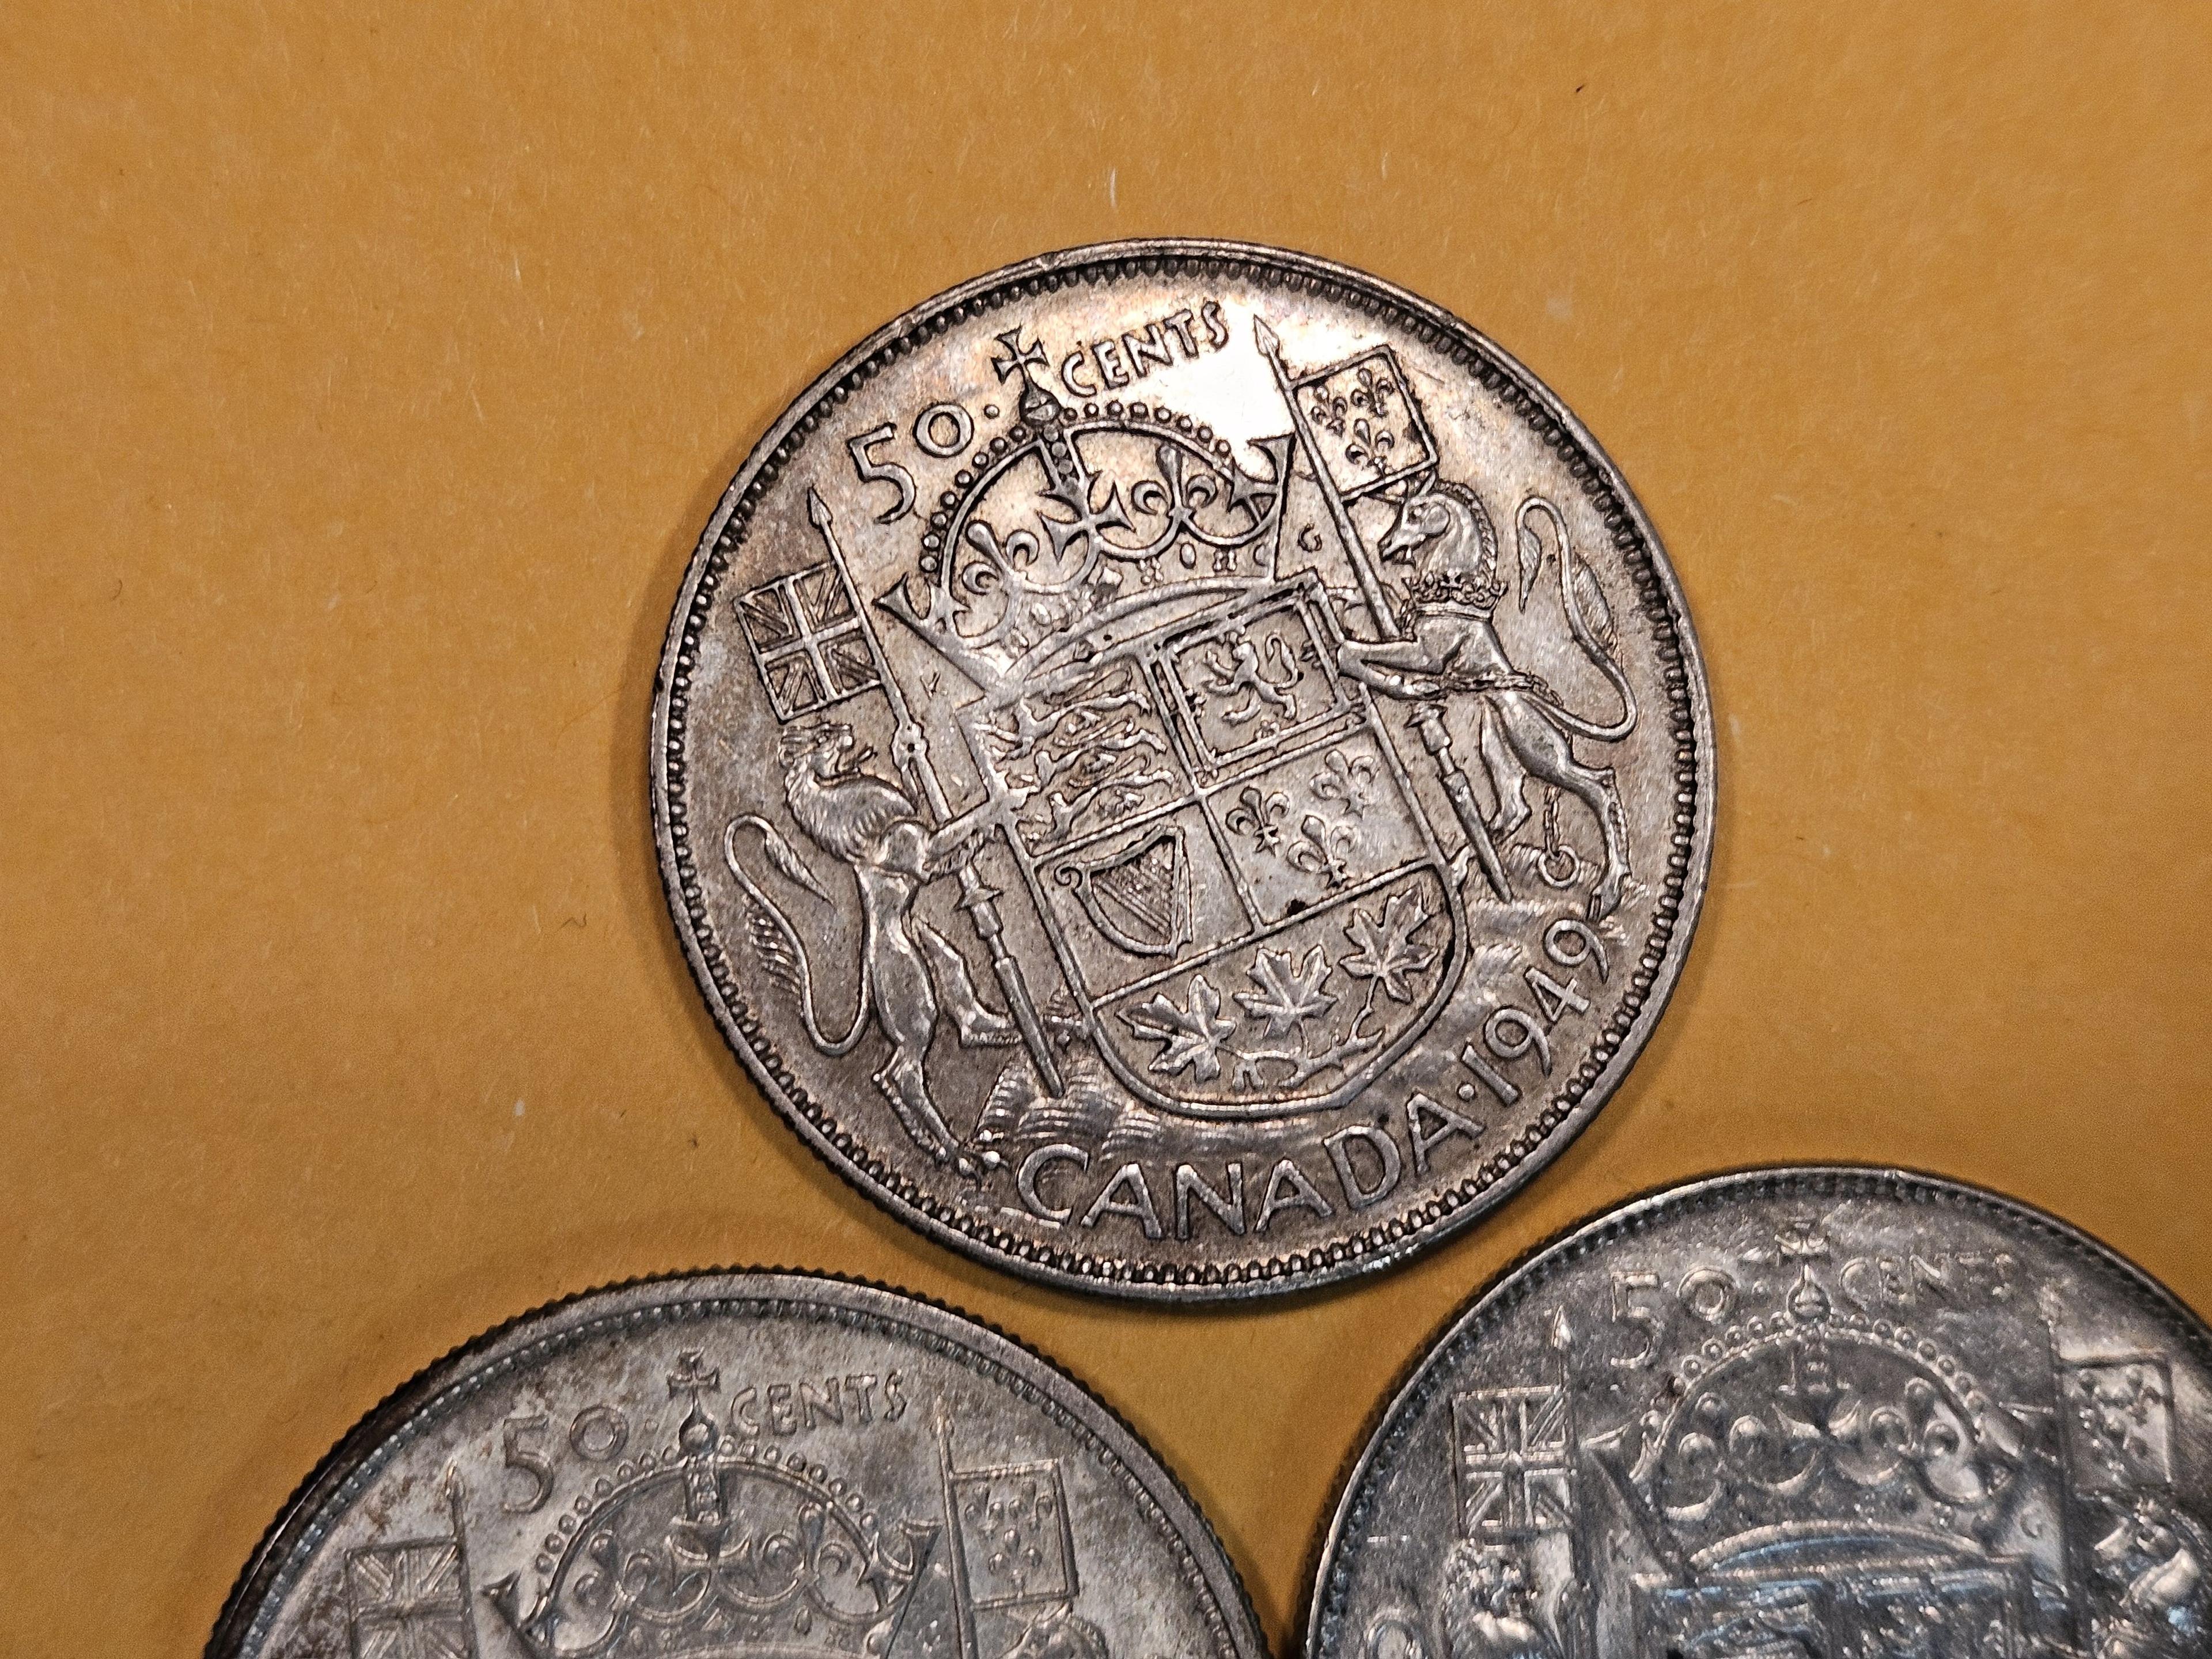 Five nice Canada Silver 50 cent pieces